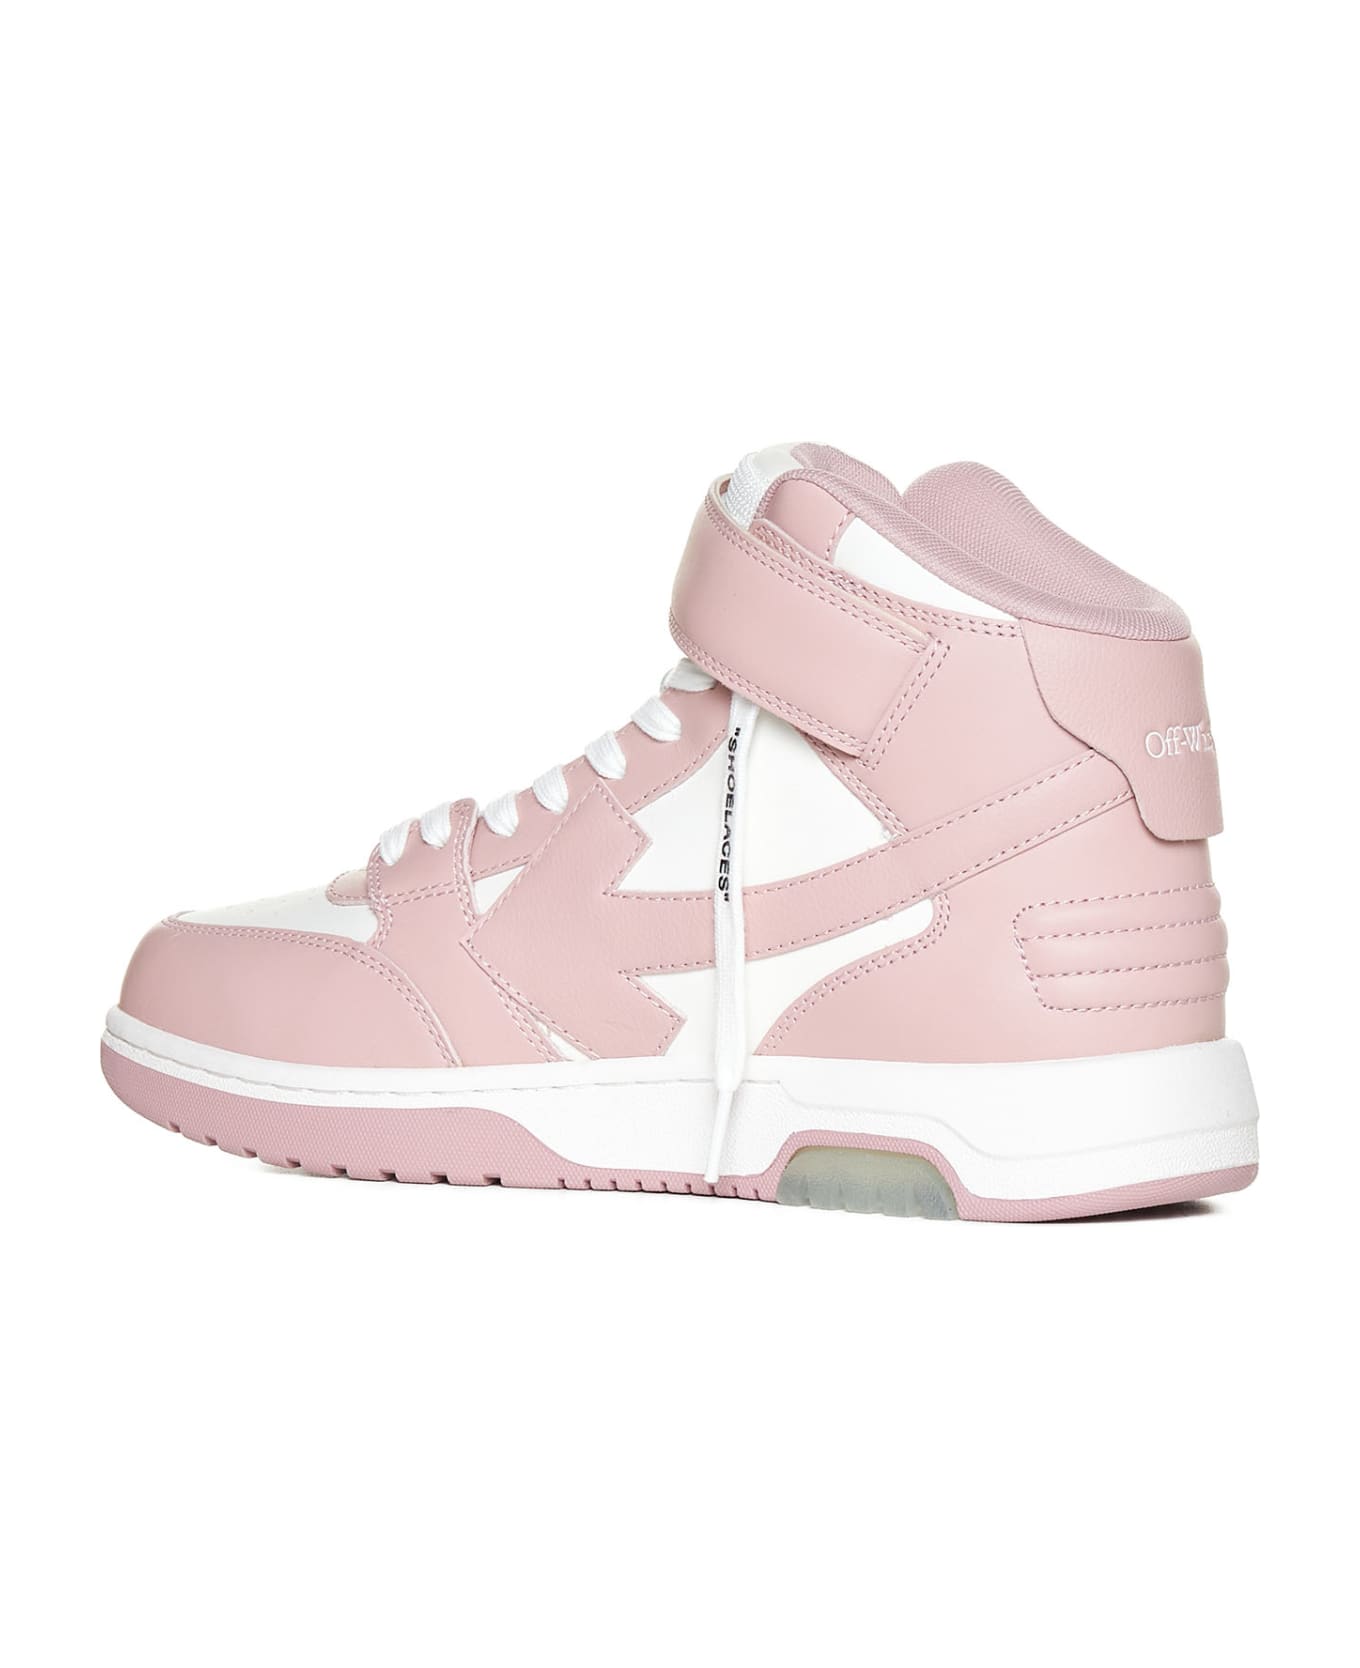 Off-White Out Of Office Mid Sneakers - White pink